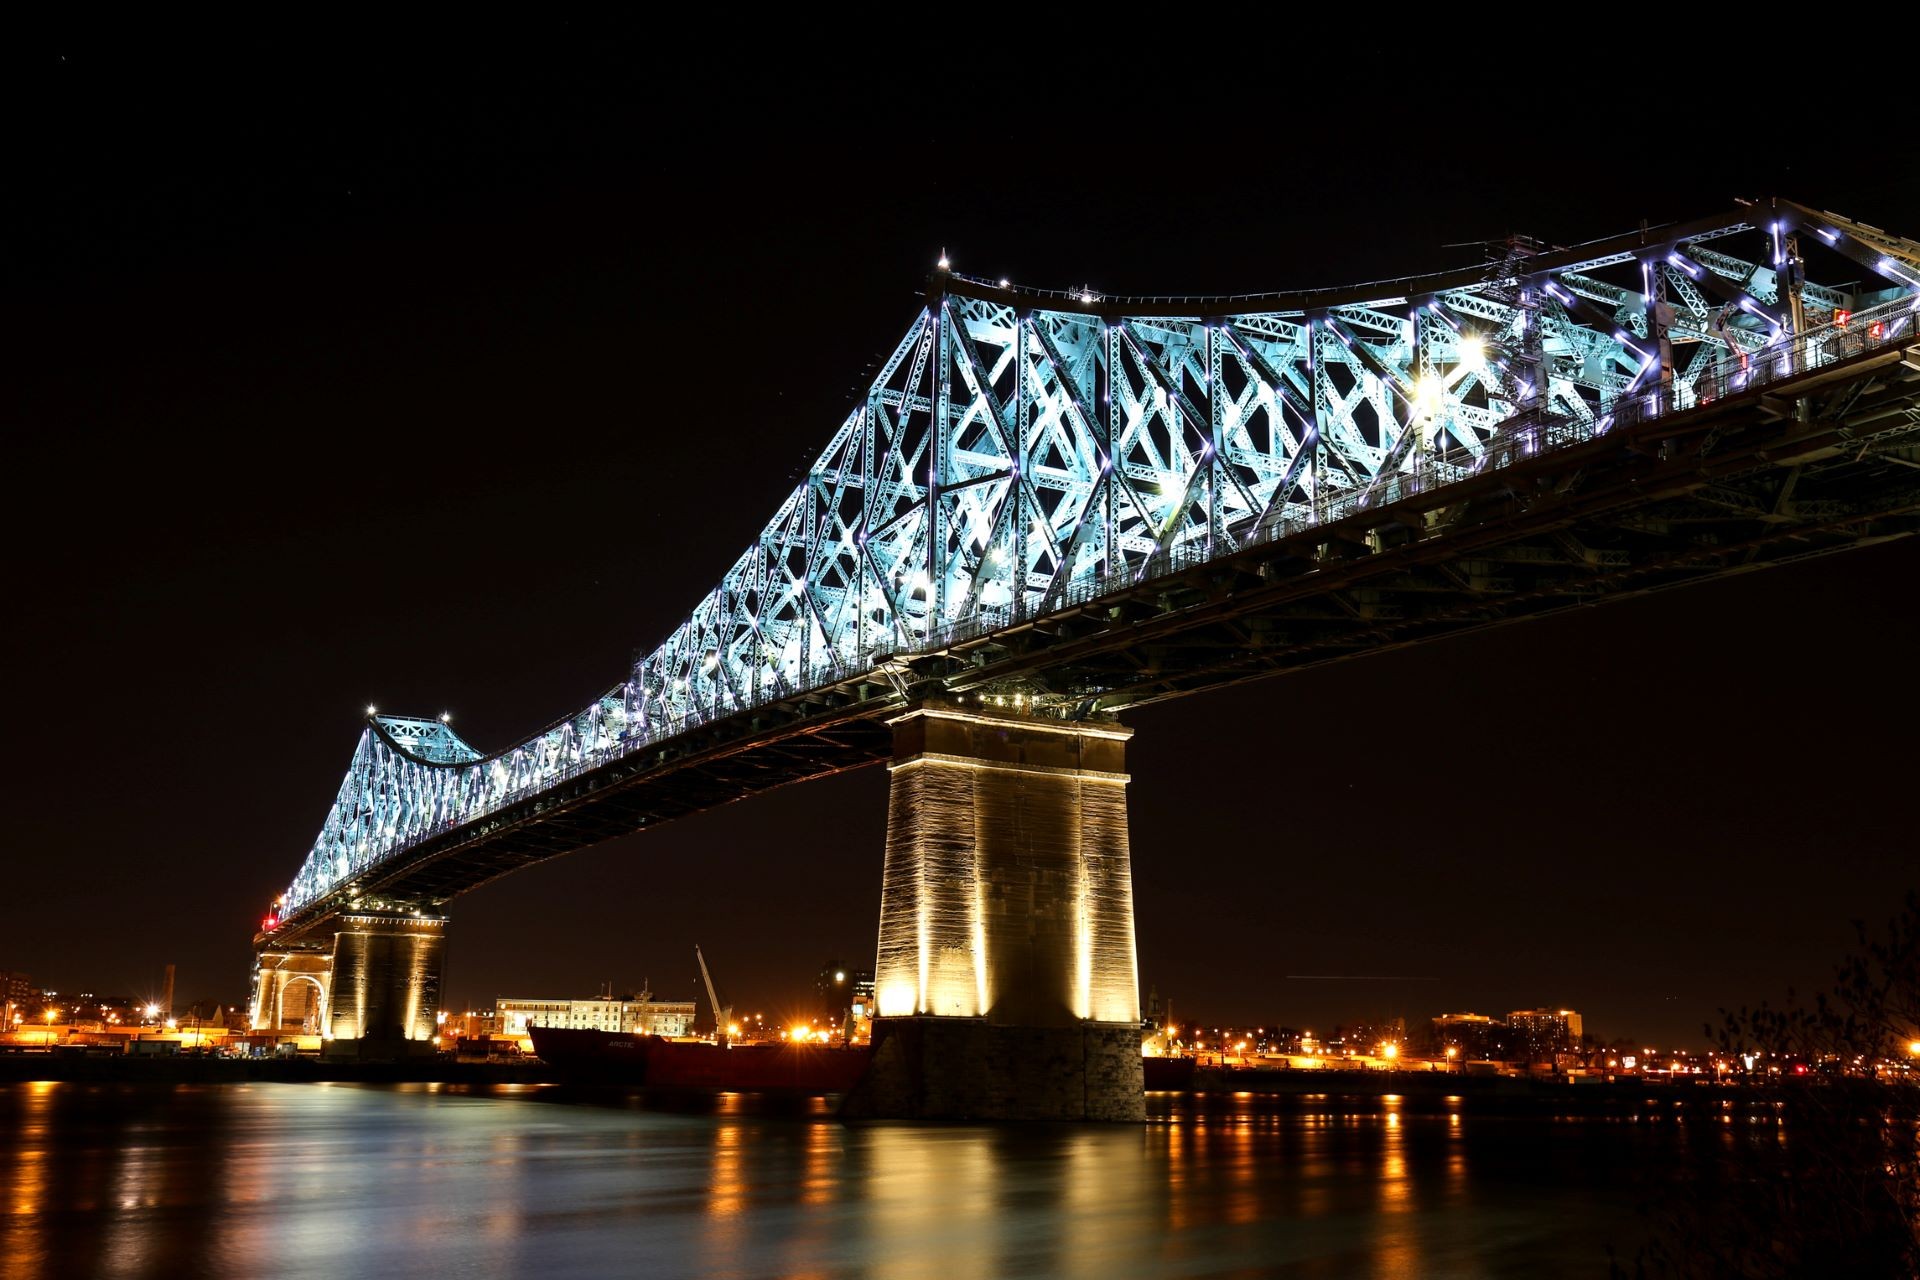 The Jacques Cartier Bridge lit up at night with a dynamic light installation.